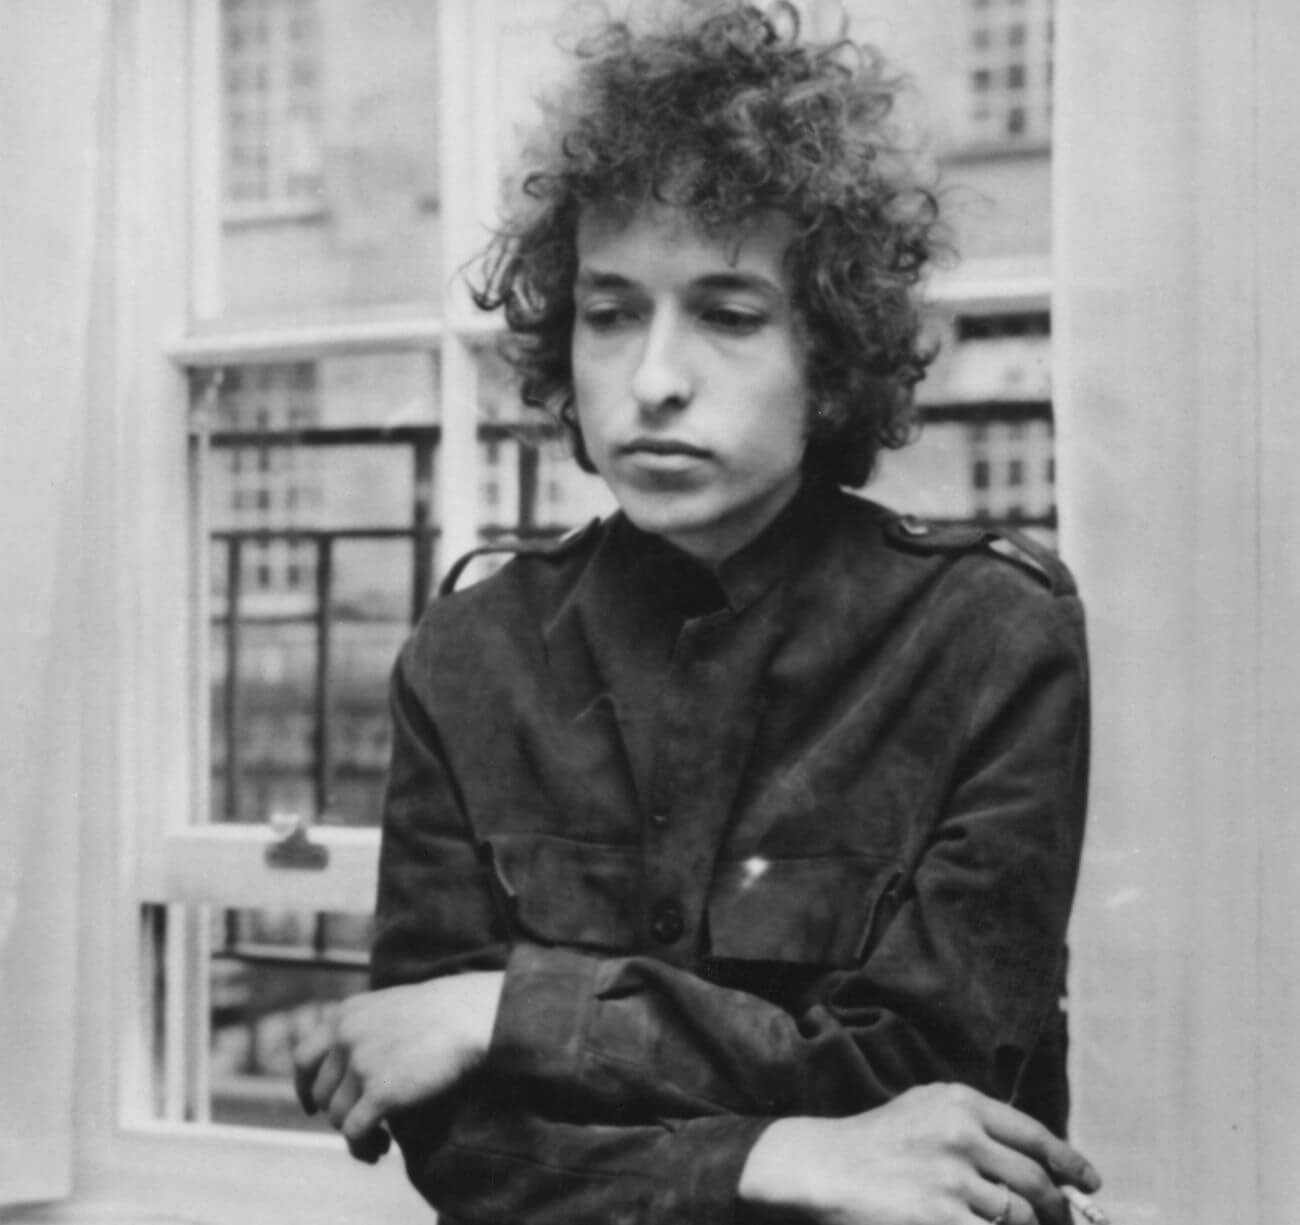 A black and white picture of Bob Dylan leaning against a window.